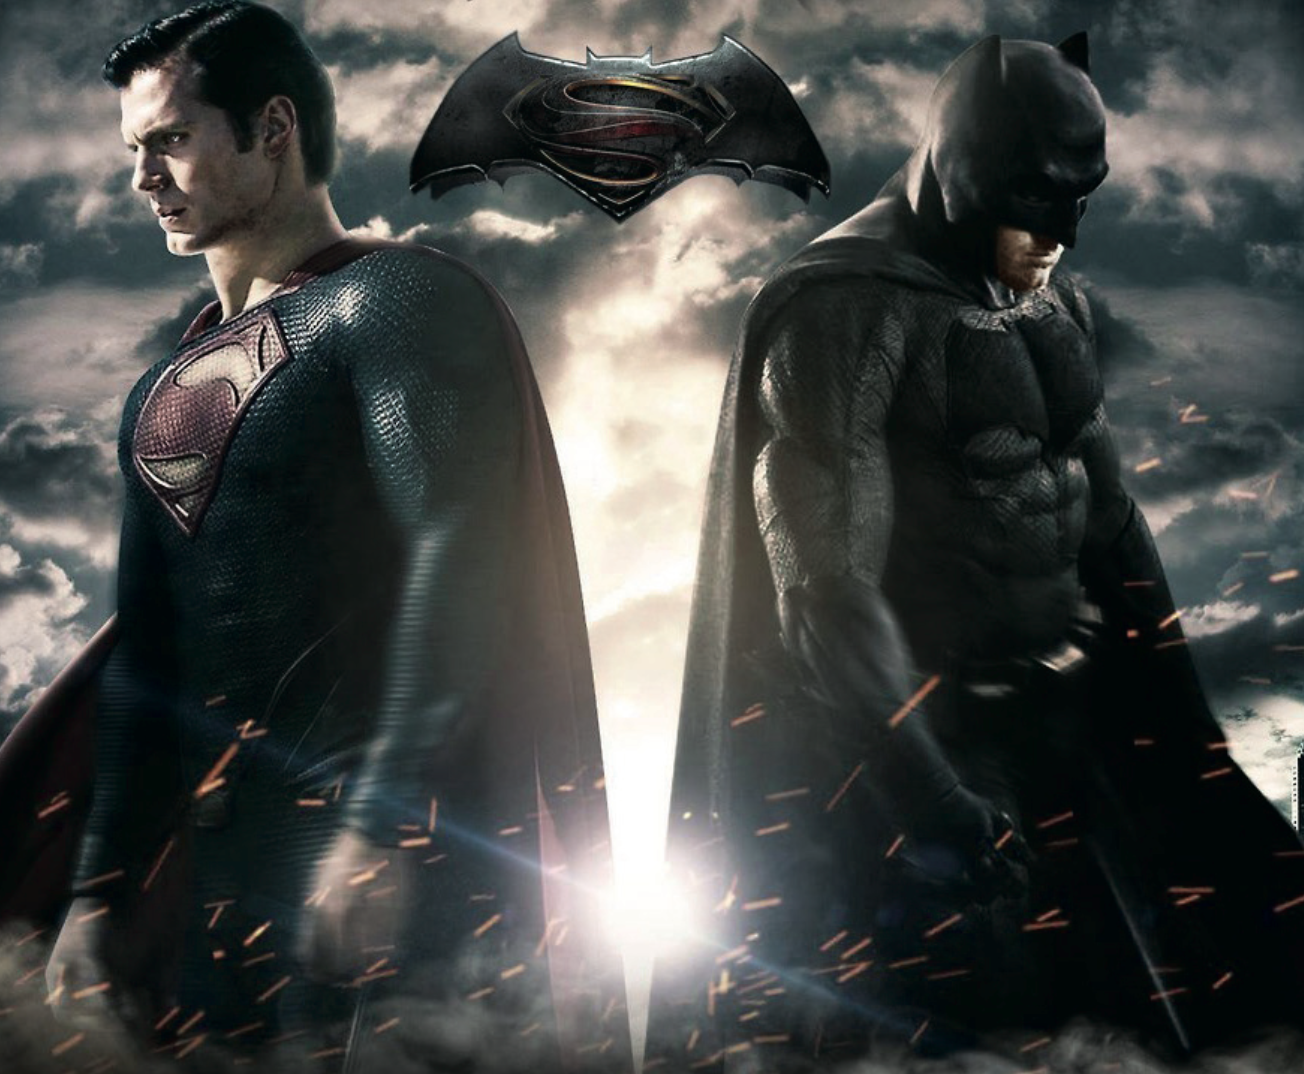 Batman V Superman does nothing with either Batman or Superman